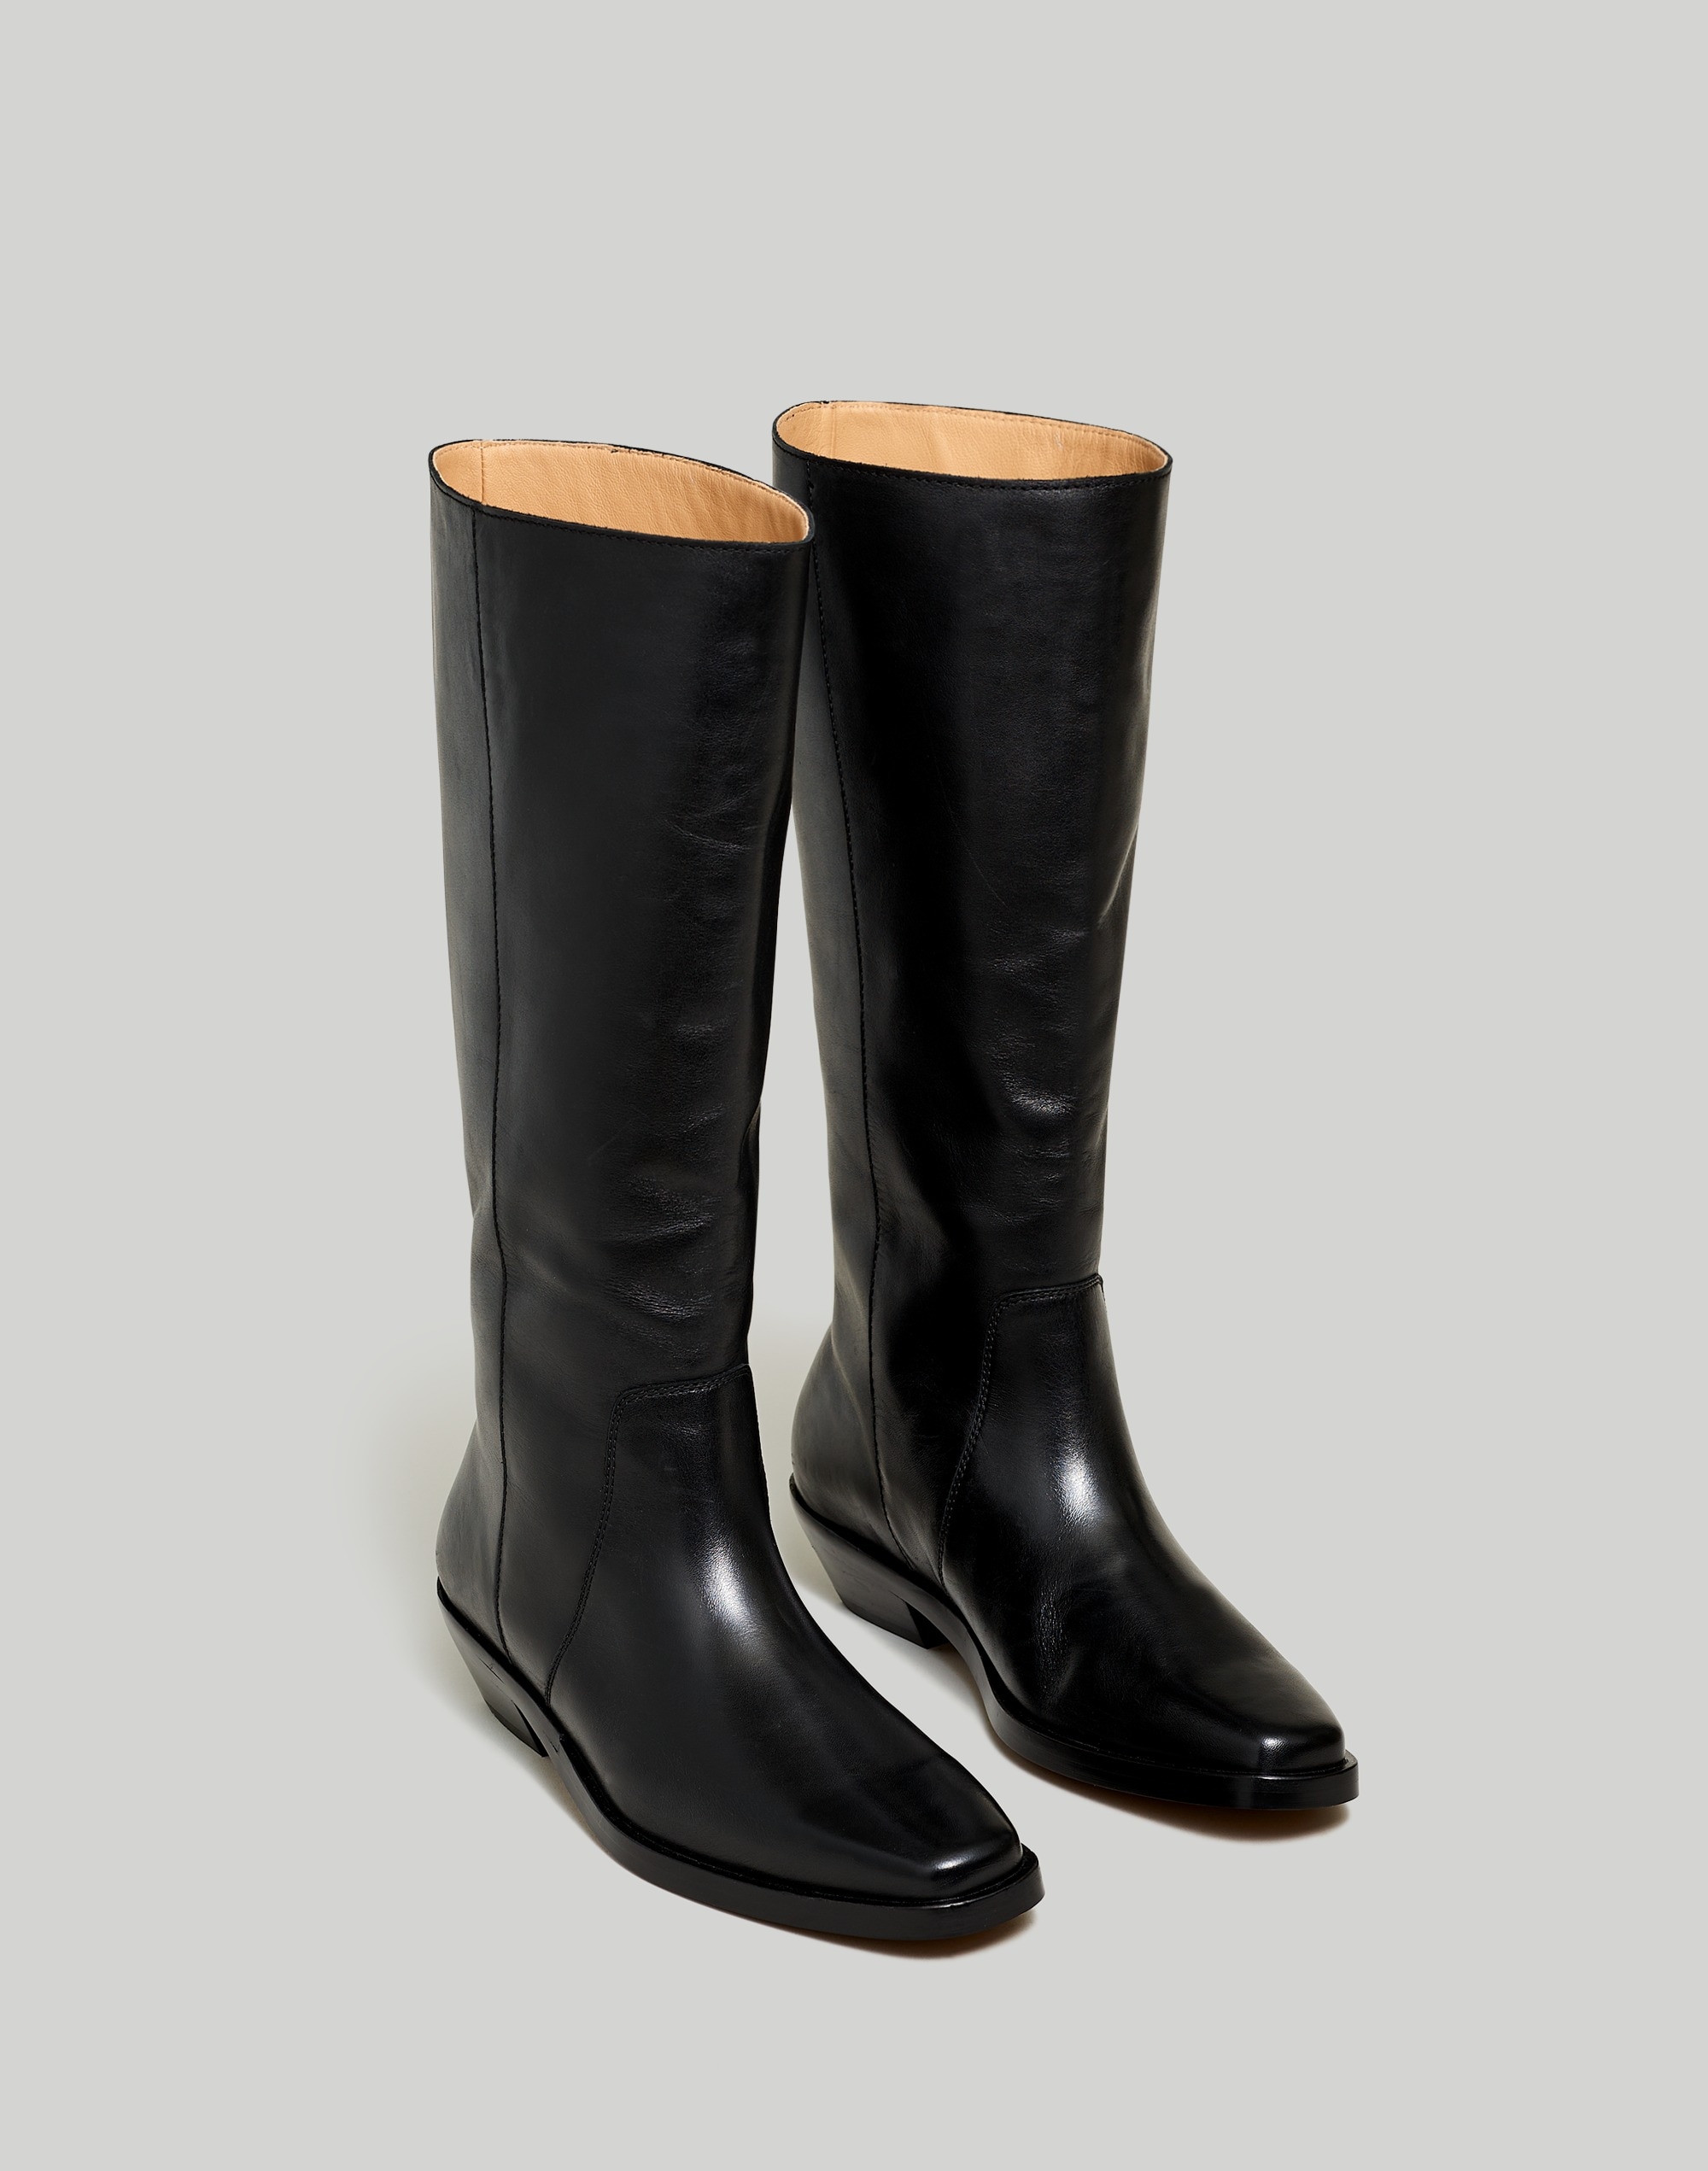 The Antoine Tall Boot with Extended Calf Leather